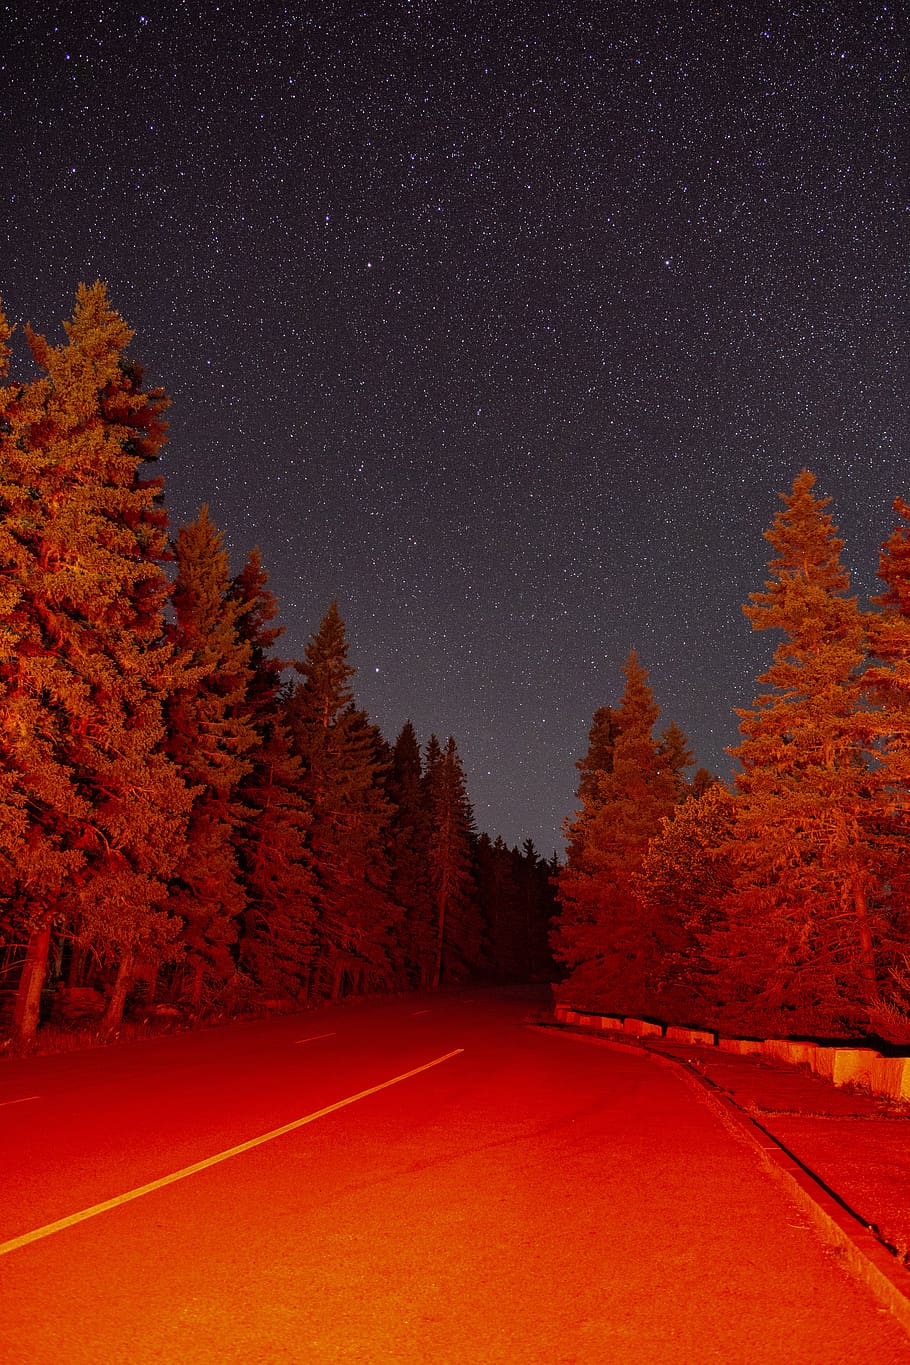 stars, night, trees, sky, nature, outdoors, road, red, light, forest